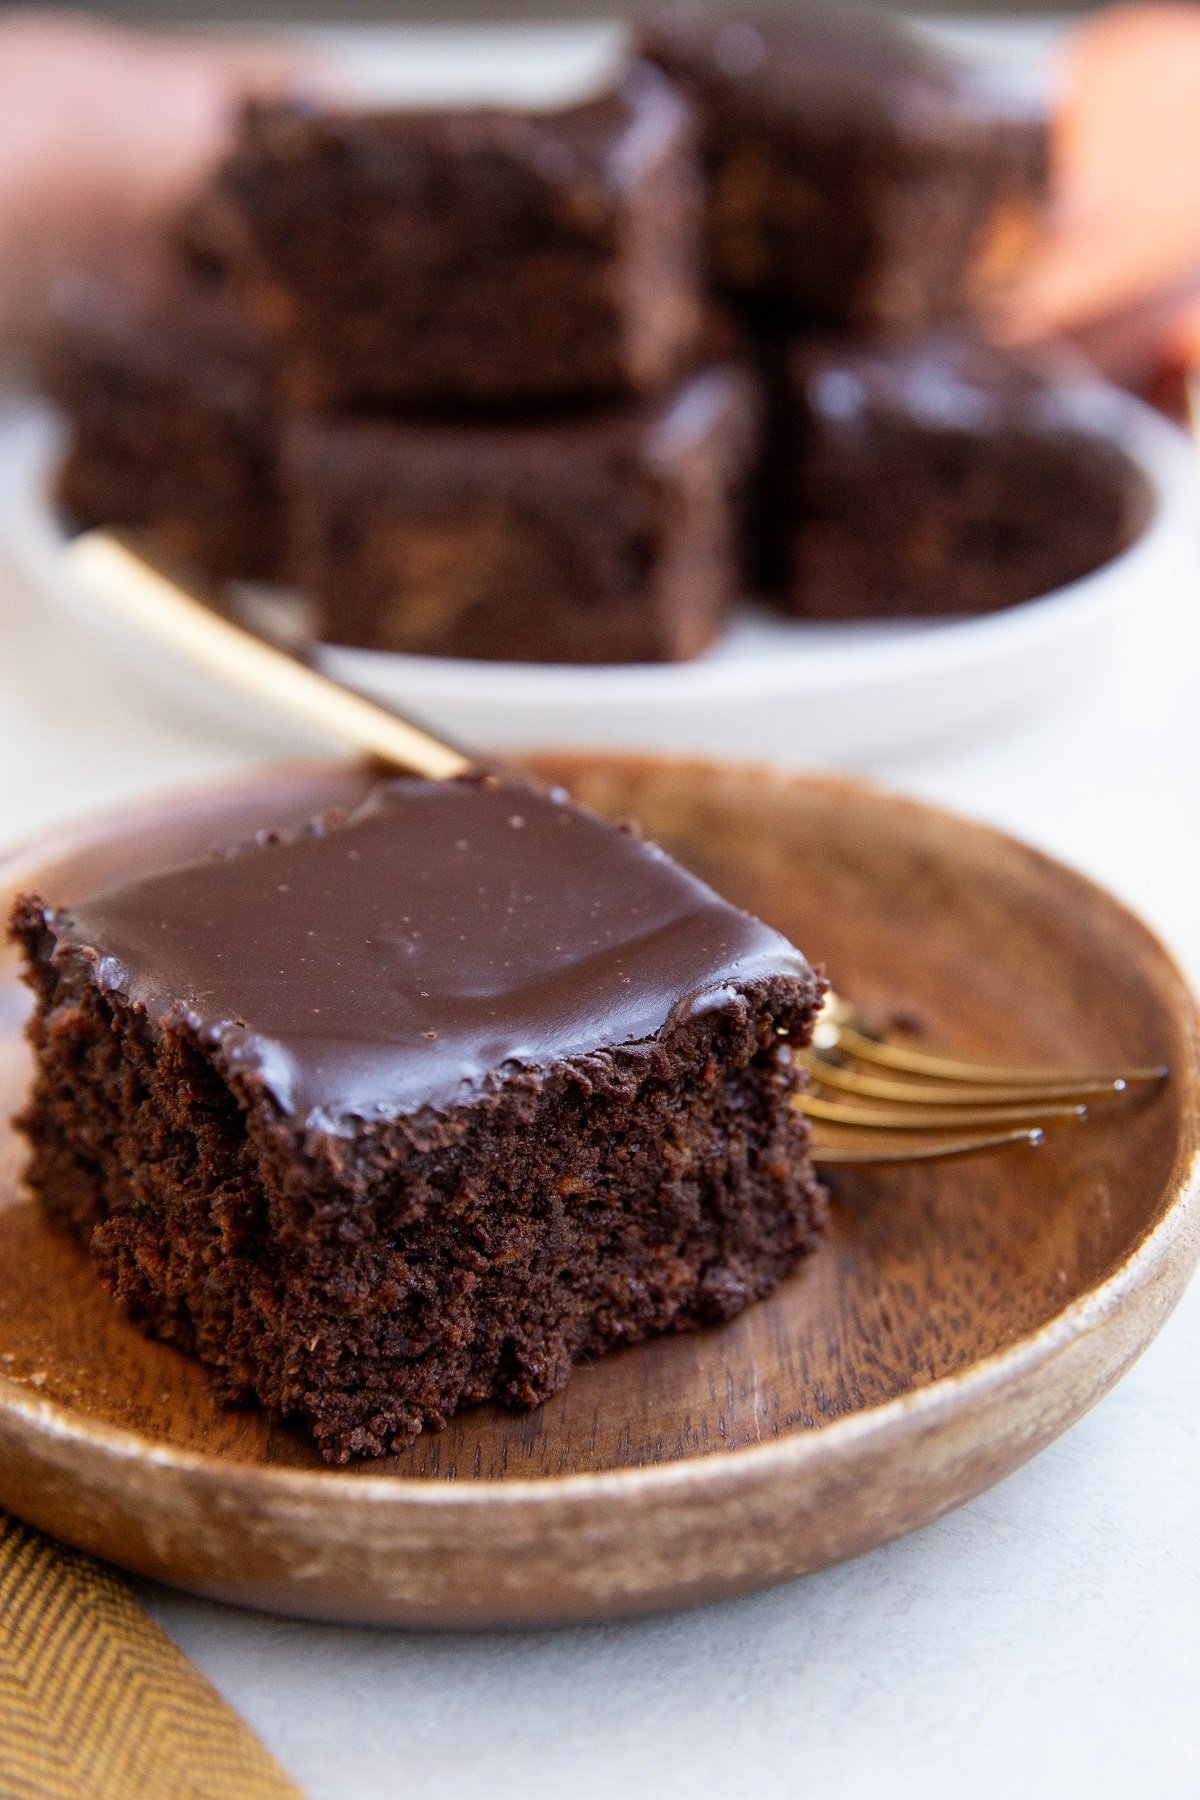 Sweet potato chocolate cake on a wood plate with a plate of chocolate cake in the background.